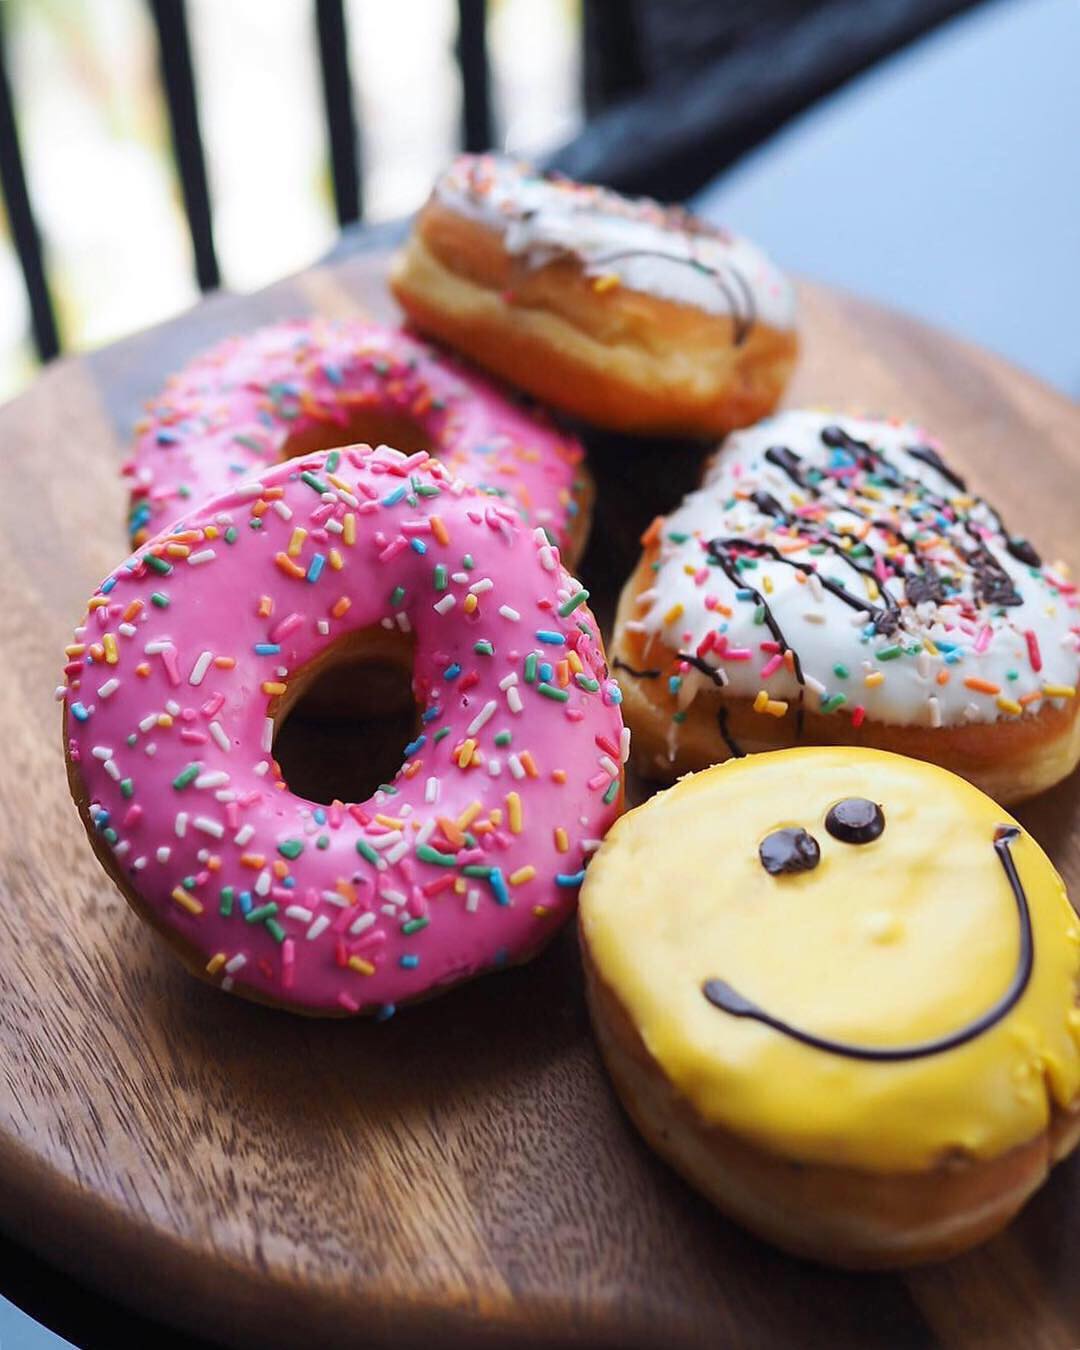 A plate of colourful, delicious looking donuts.